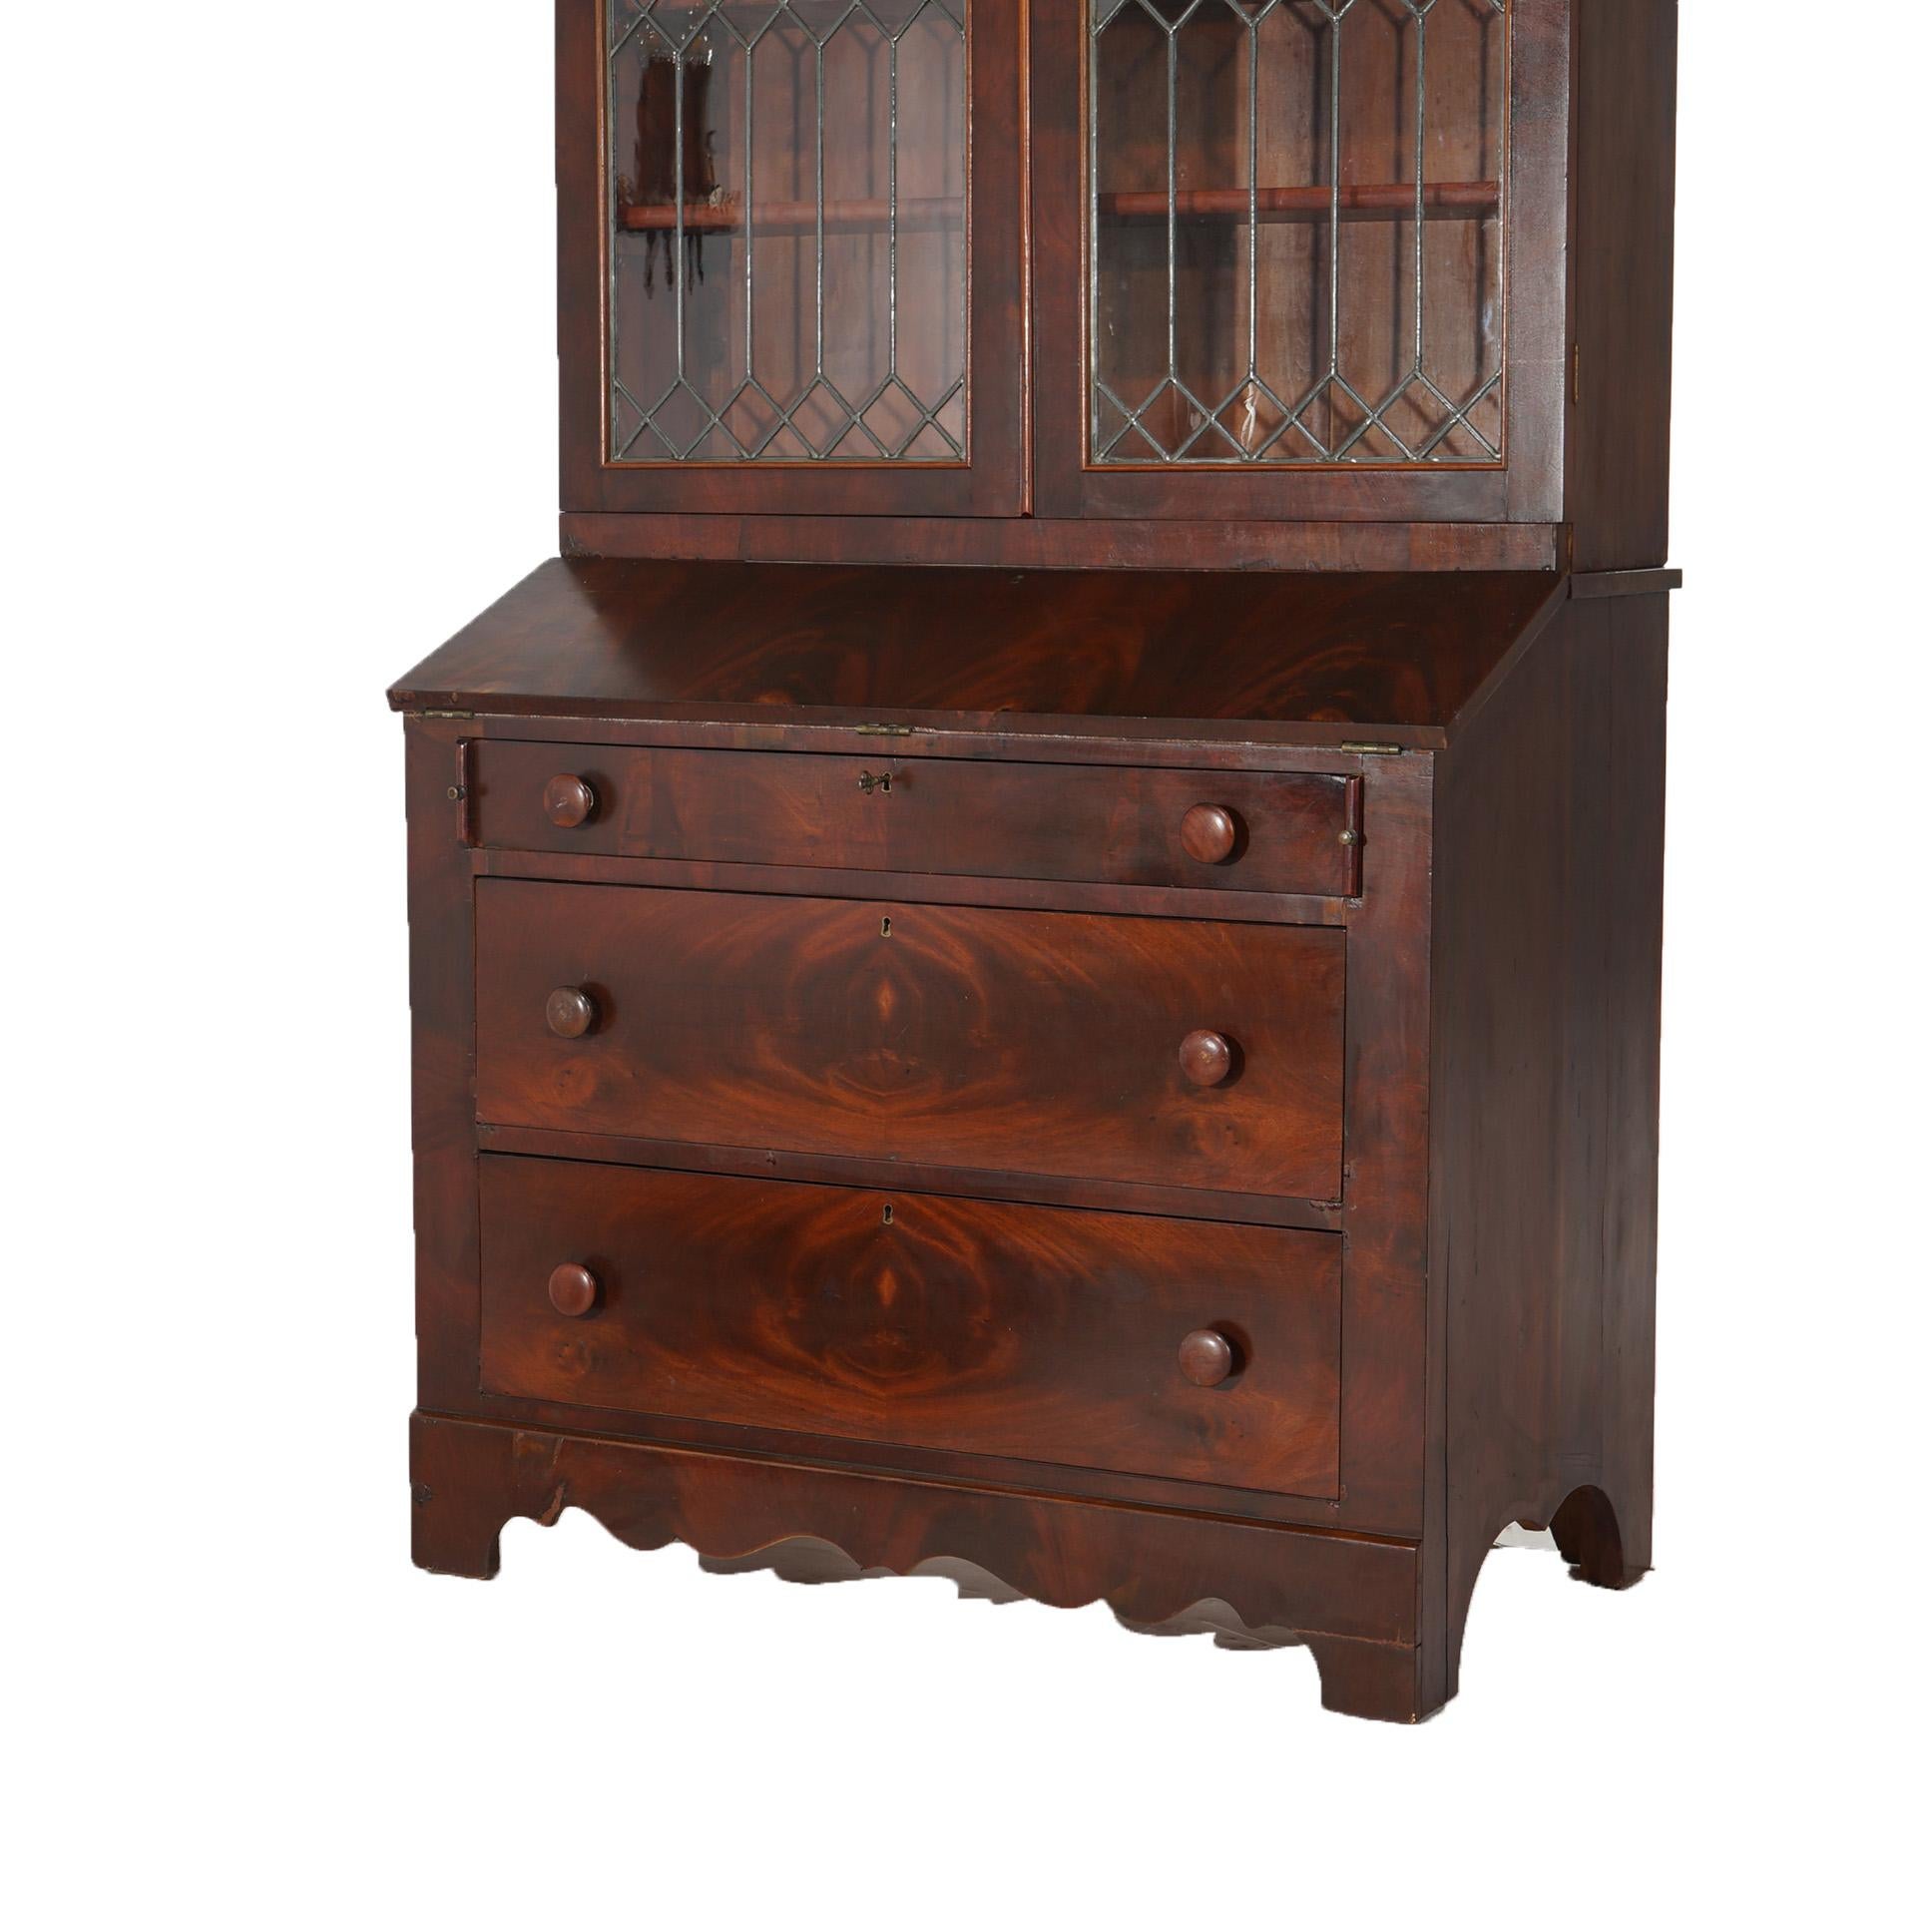 Antique American Empire Flame Mahogany Secretary Desk With Leaded Glass c1840 In Good Condition For Sale In Big Flats, NY